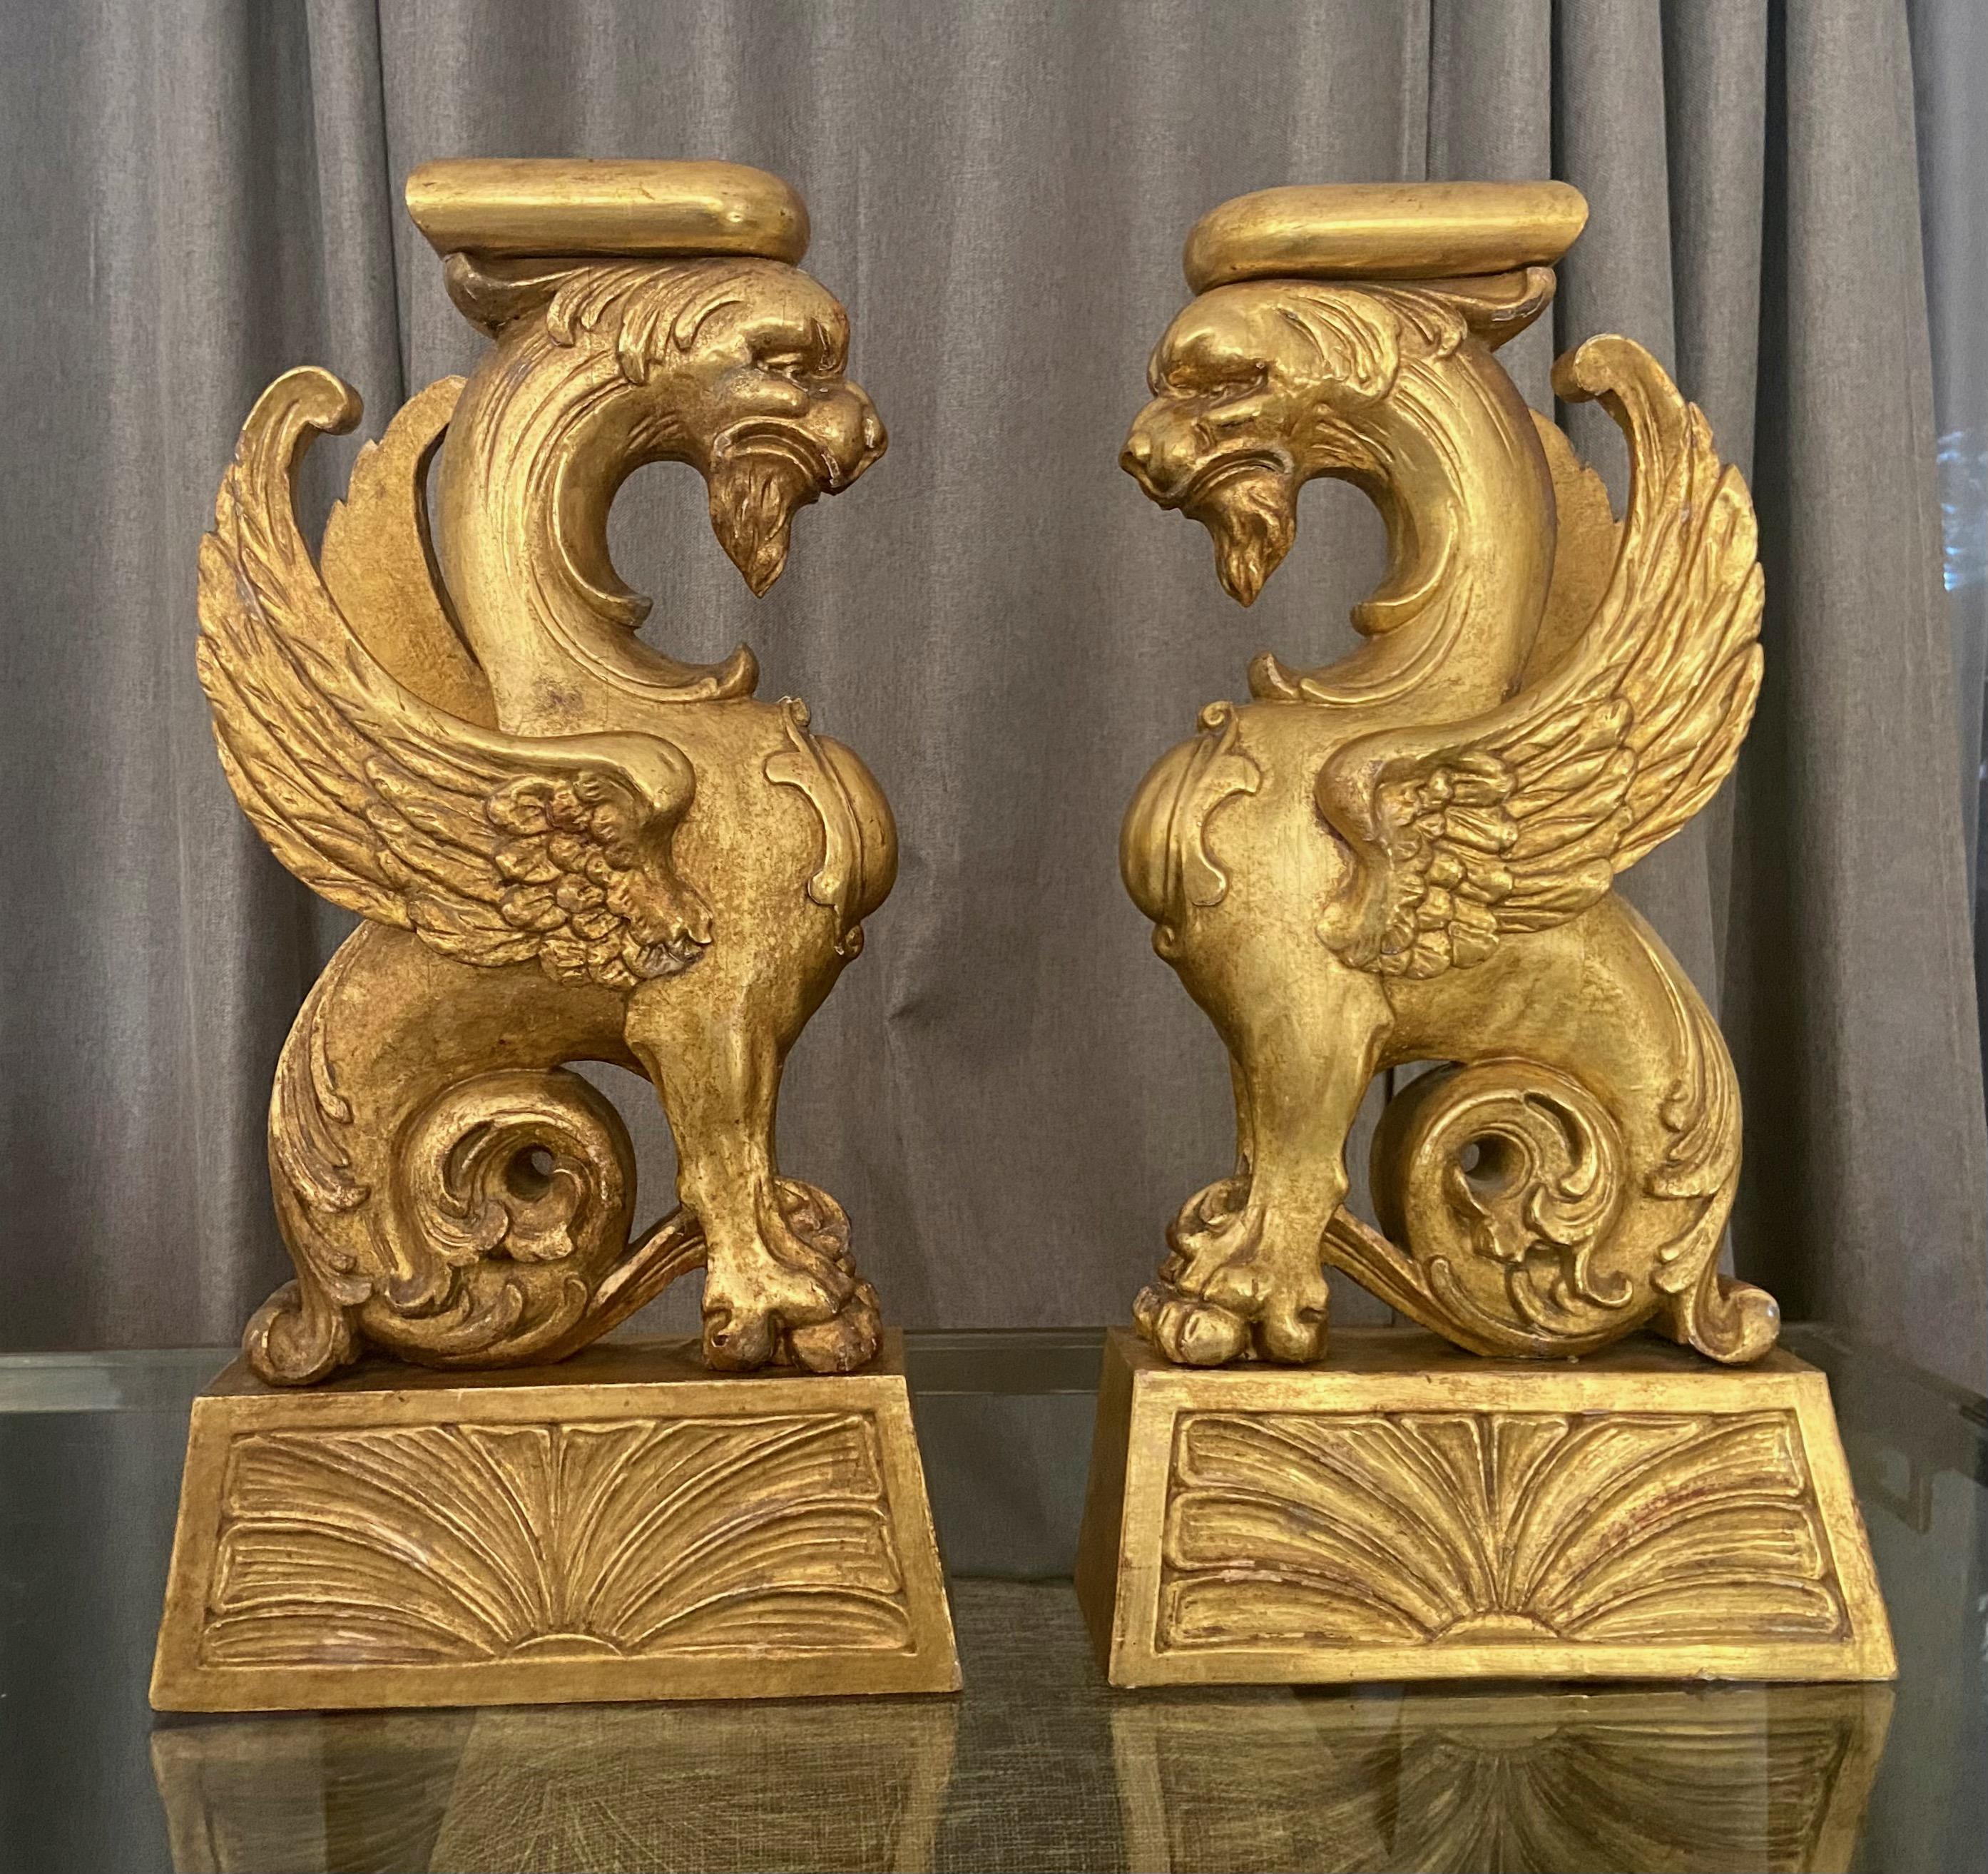 Pair of majestic French 19th century carved 23k giltwood mythological Griffin sculptures. Expertly carved. These impressive one of kind griffin sculptures (or statues) were architectural elements converted to decorative display art.

The griffin is